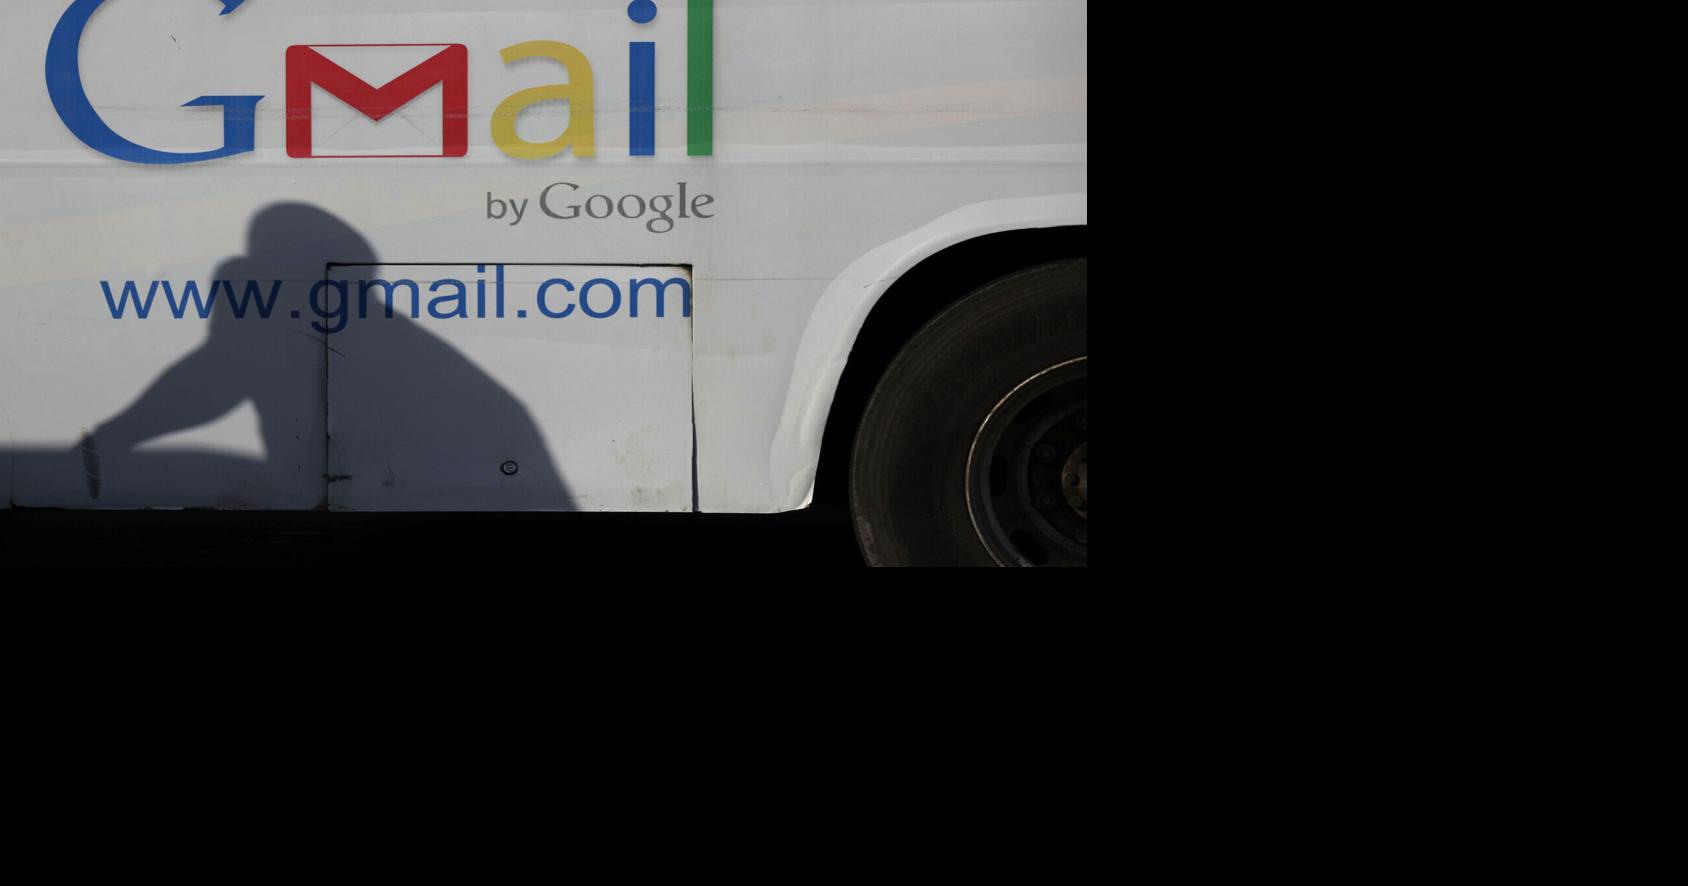 Gmail thought to be April Fool's Day joke 20 years ago